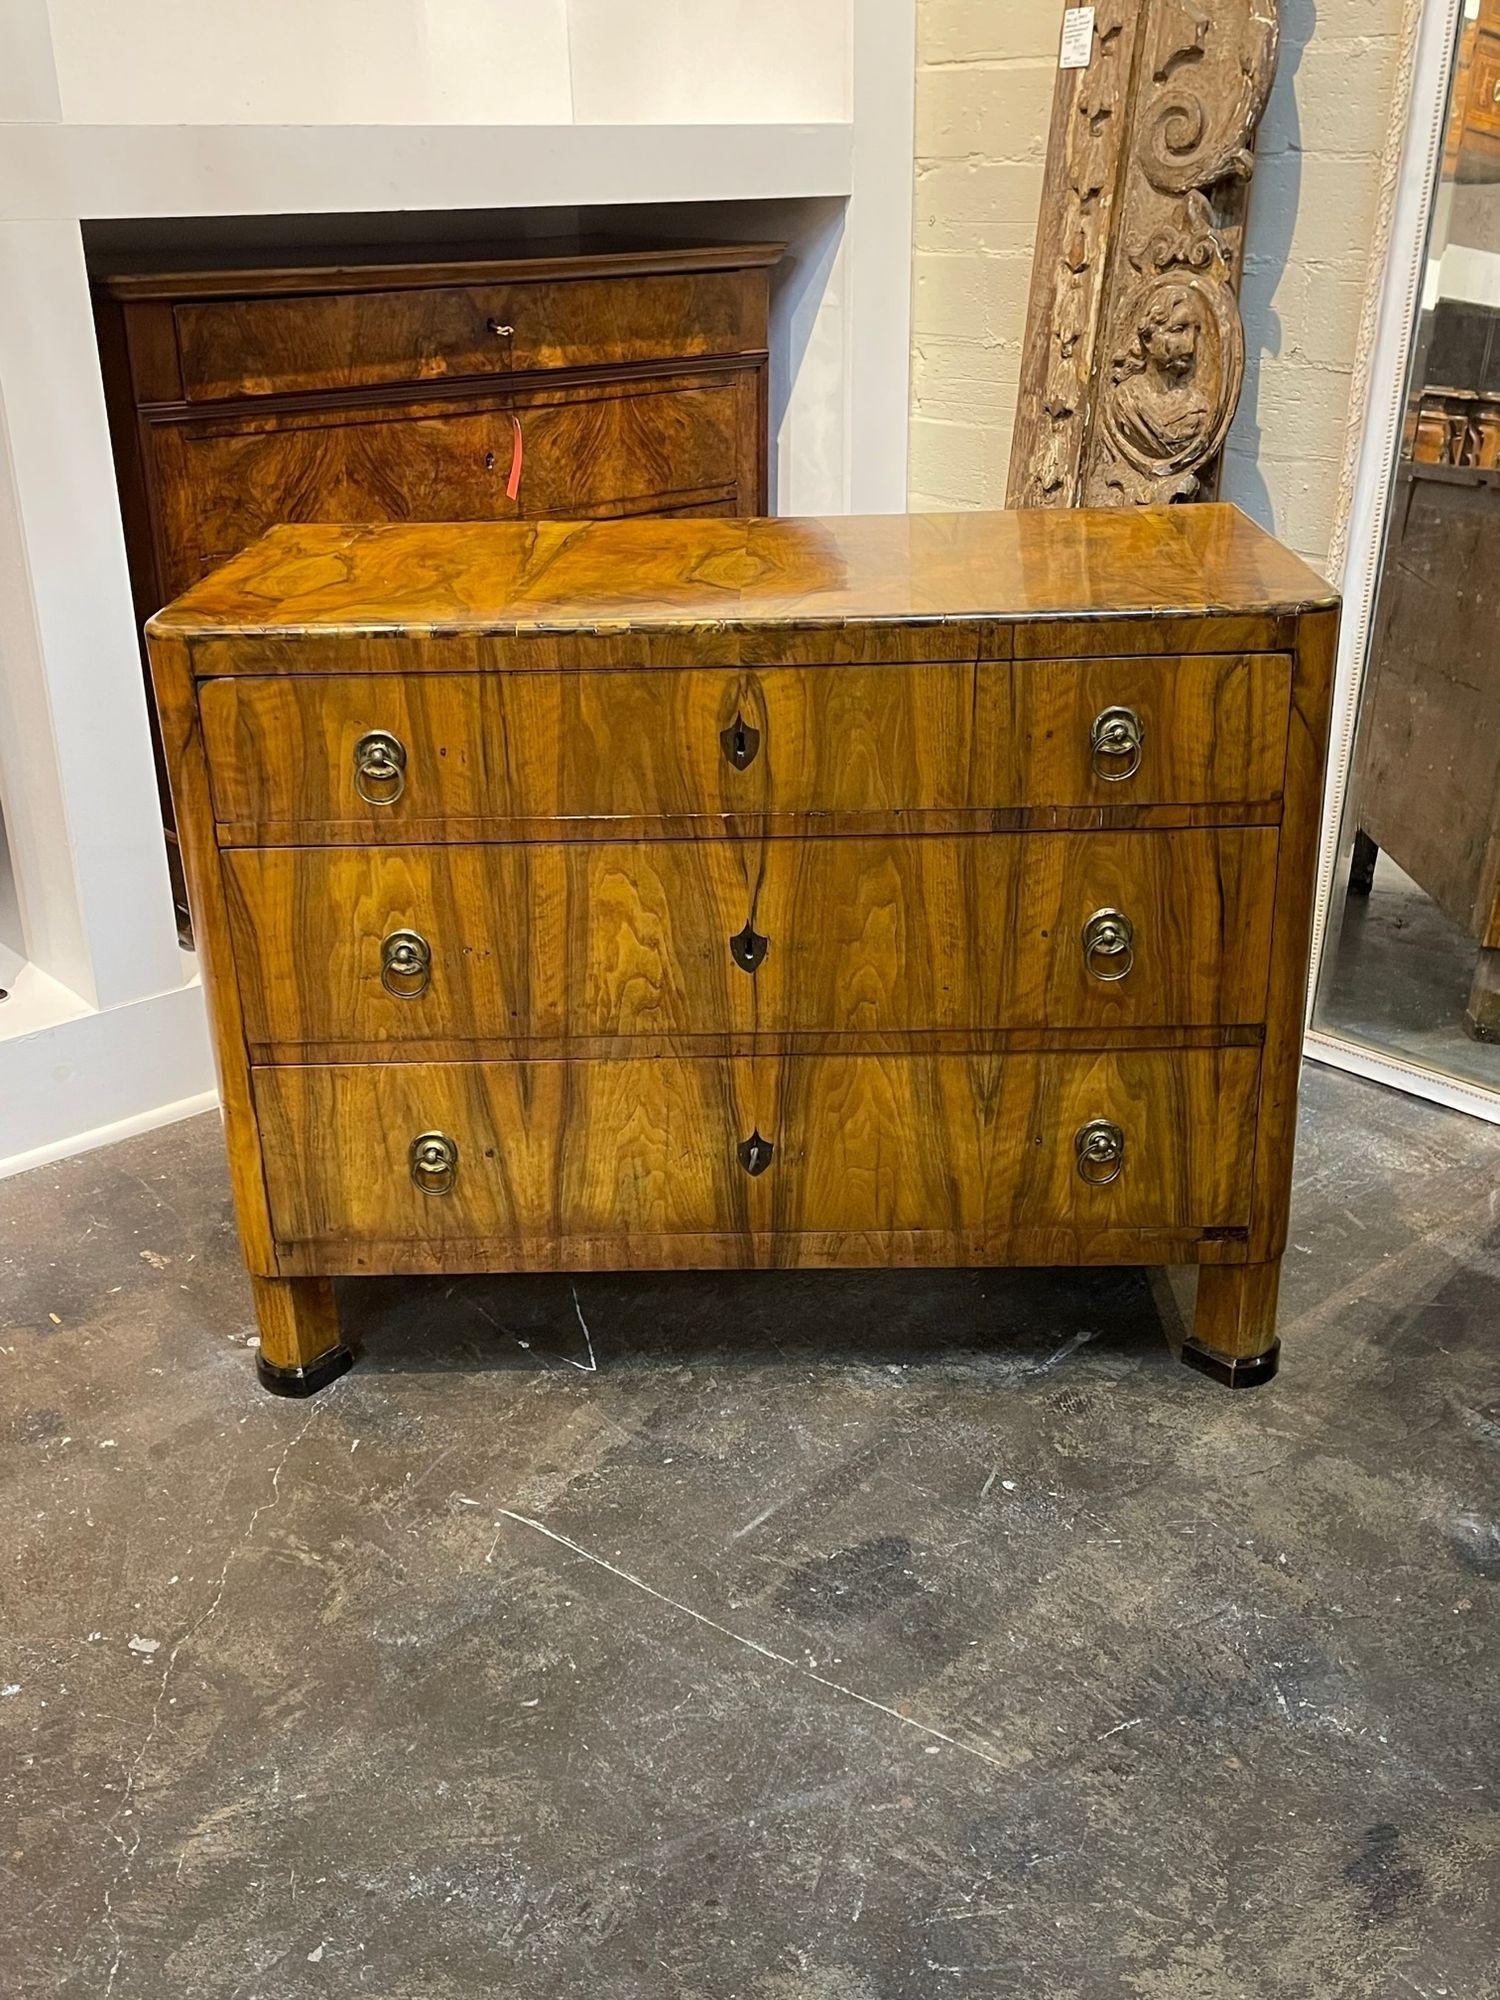 Very fine 19th century German walnut Biedermeier commode. Exceptional quality on this piece and very fine polished finish as well. Superb!!